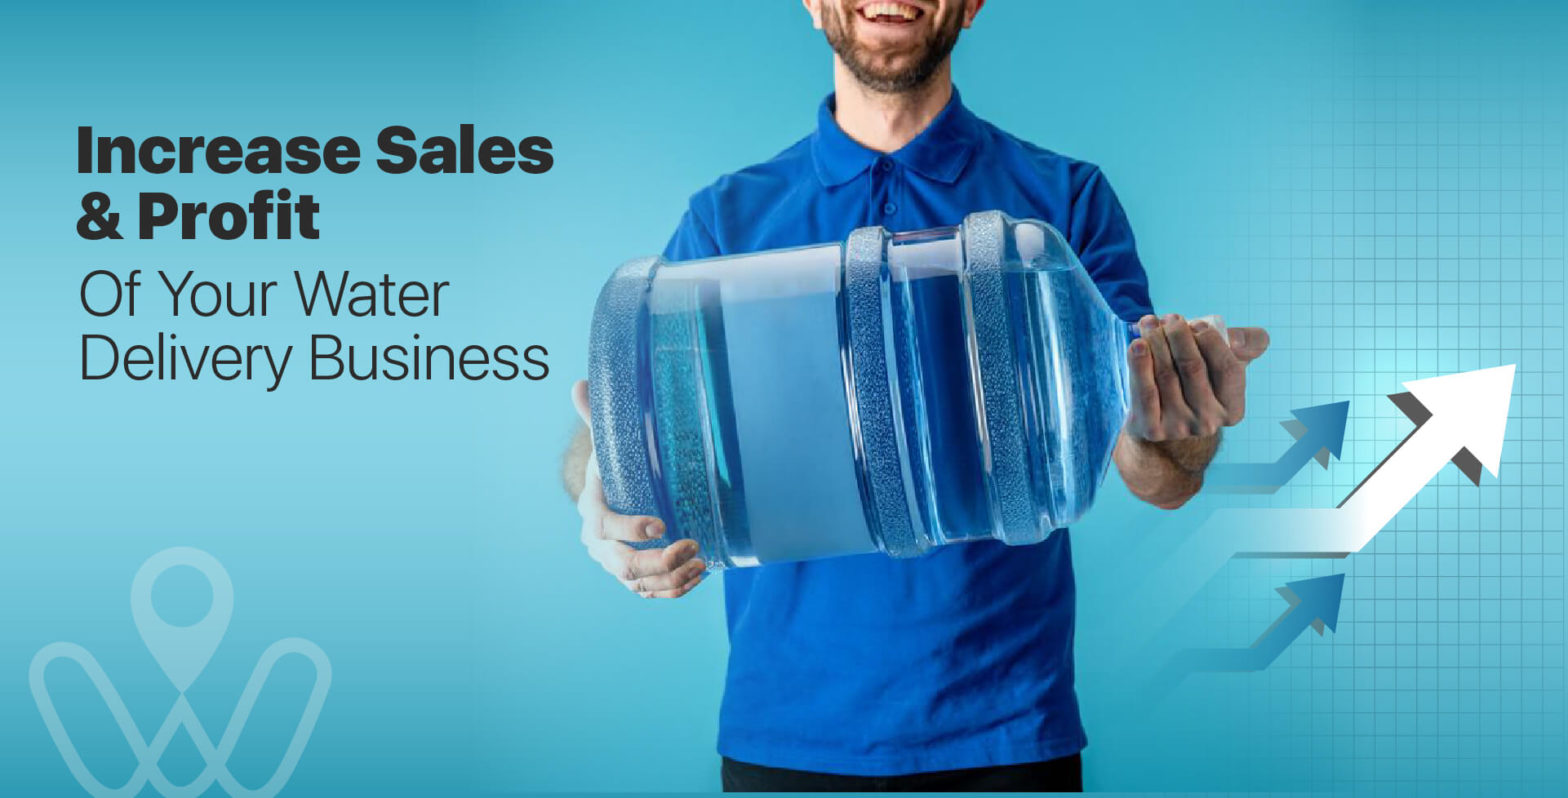 Increase sales and profit of your water delivery business with online water distribution software